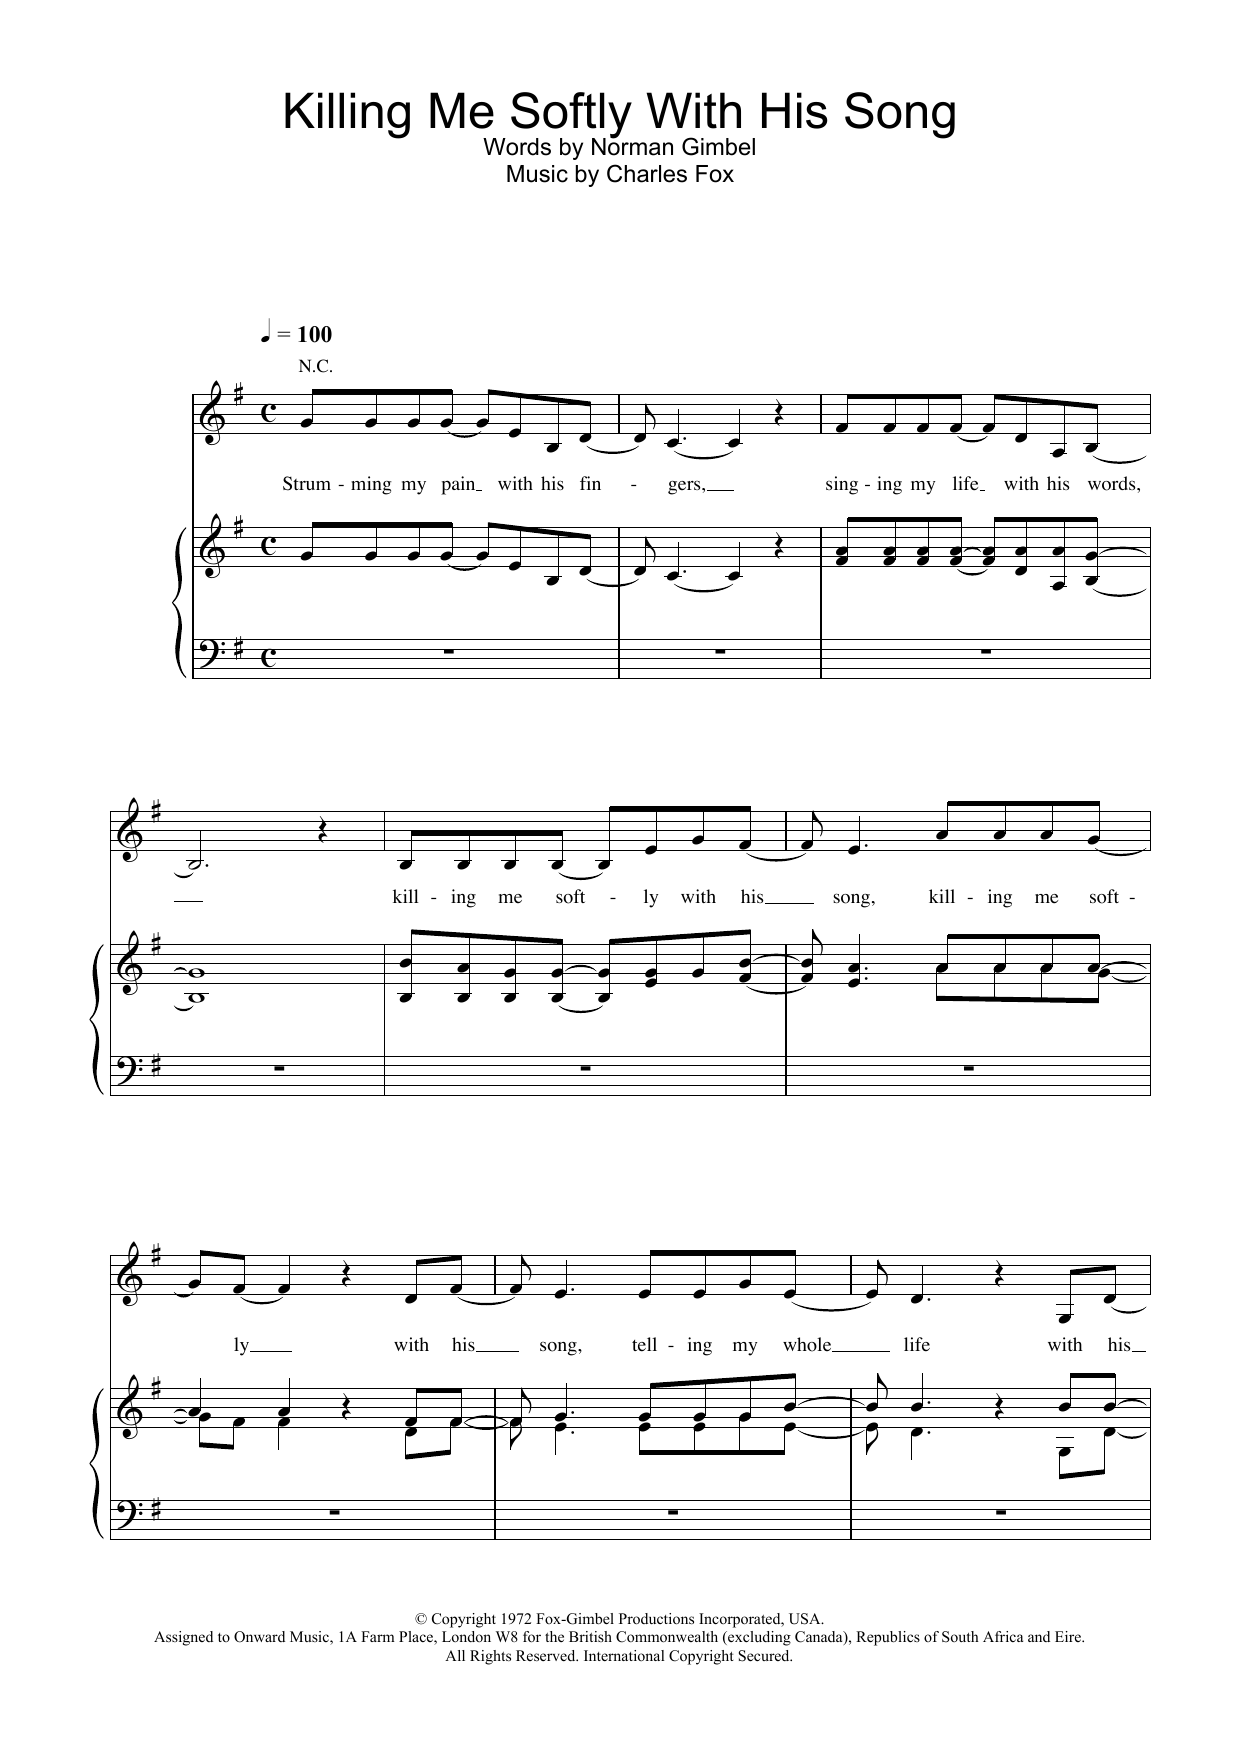 Fugees Killing Me Softly With His Song sheet music notes printable PDF score